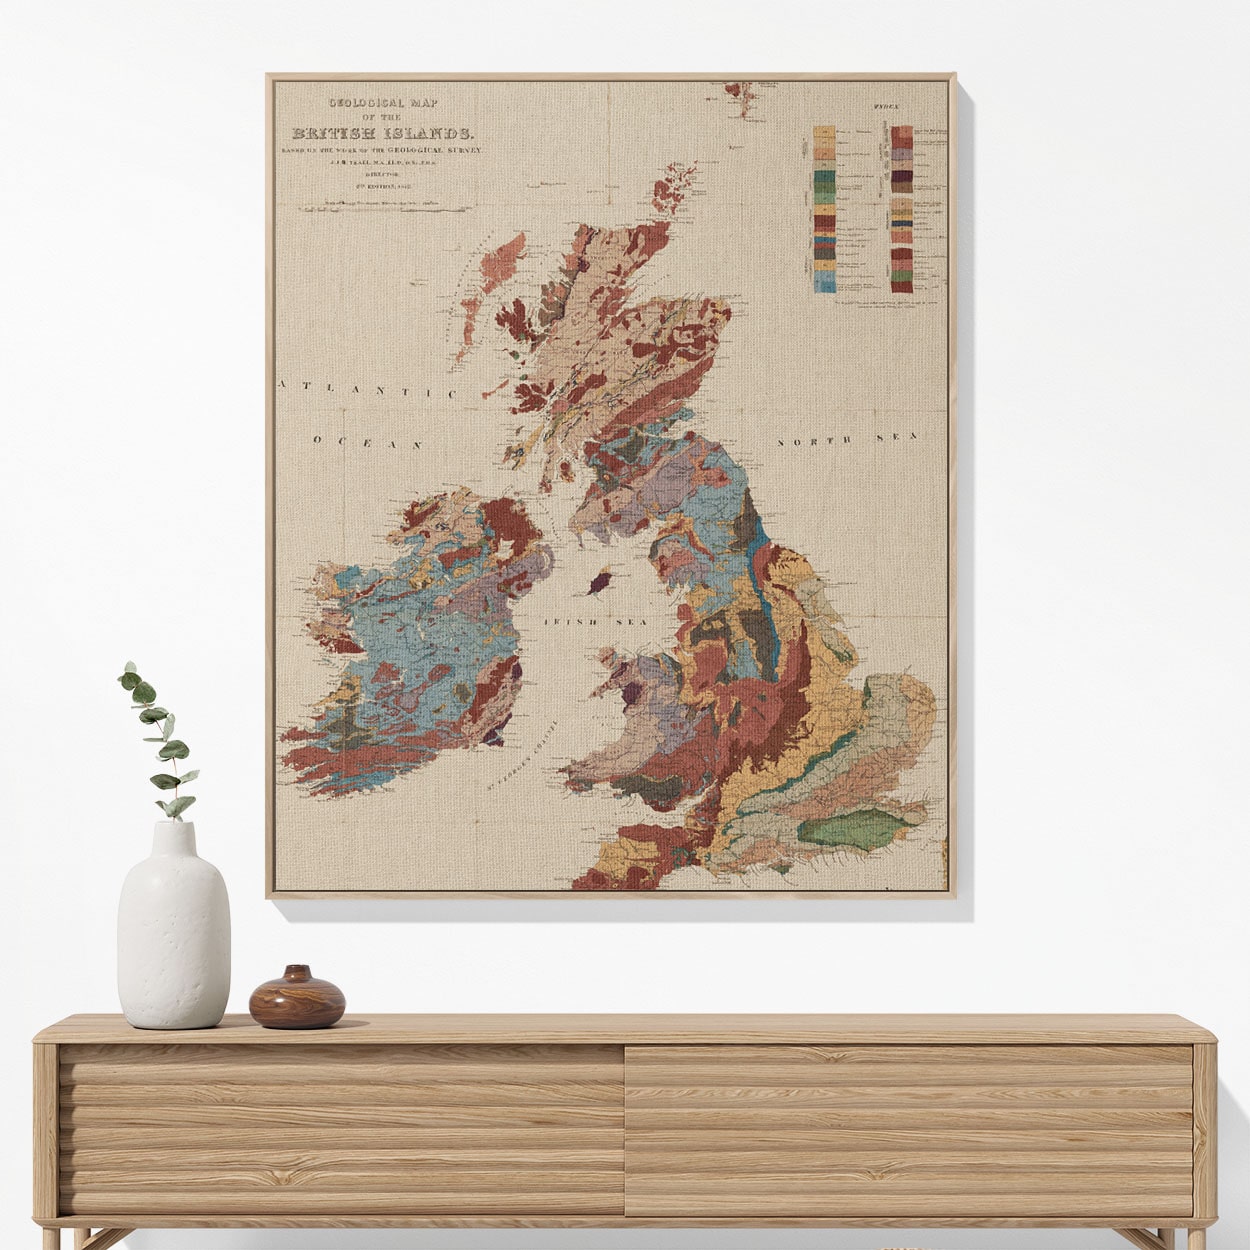 Vintage United Kingdom Map Woven Blanket Woven Blanket Hanging on a Wall as Framed Wall Art